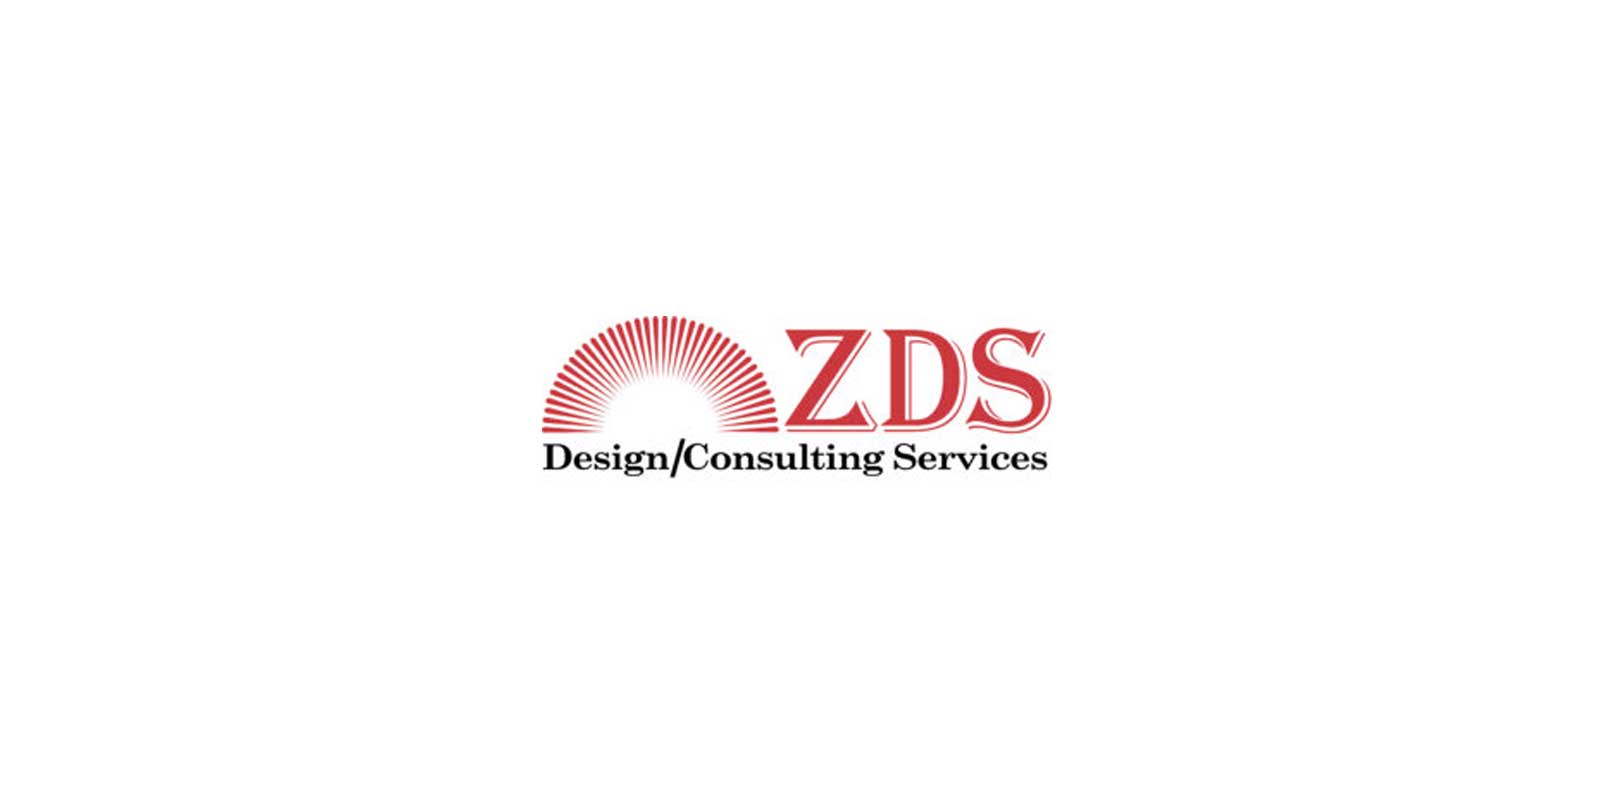 ZDS Design/Consulting Services Logo